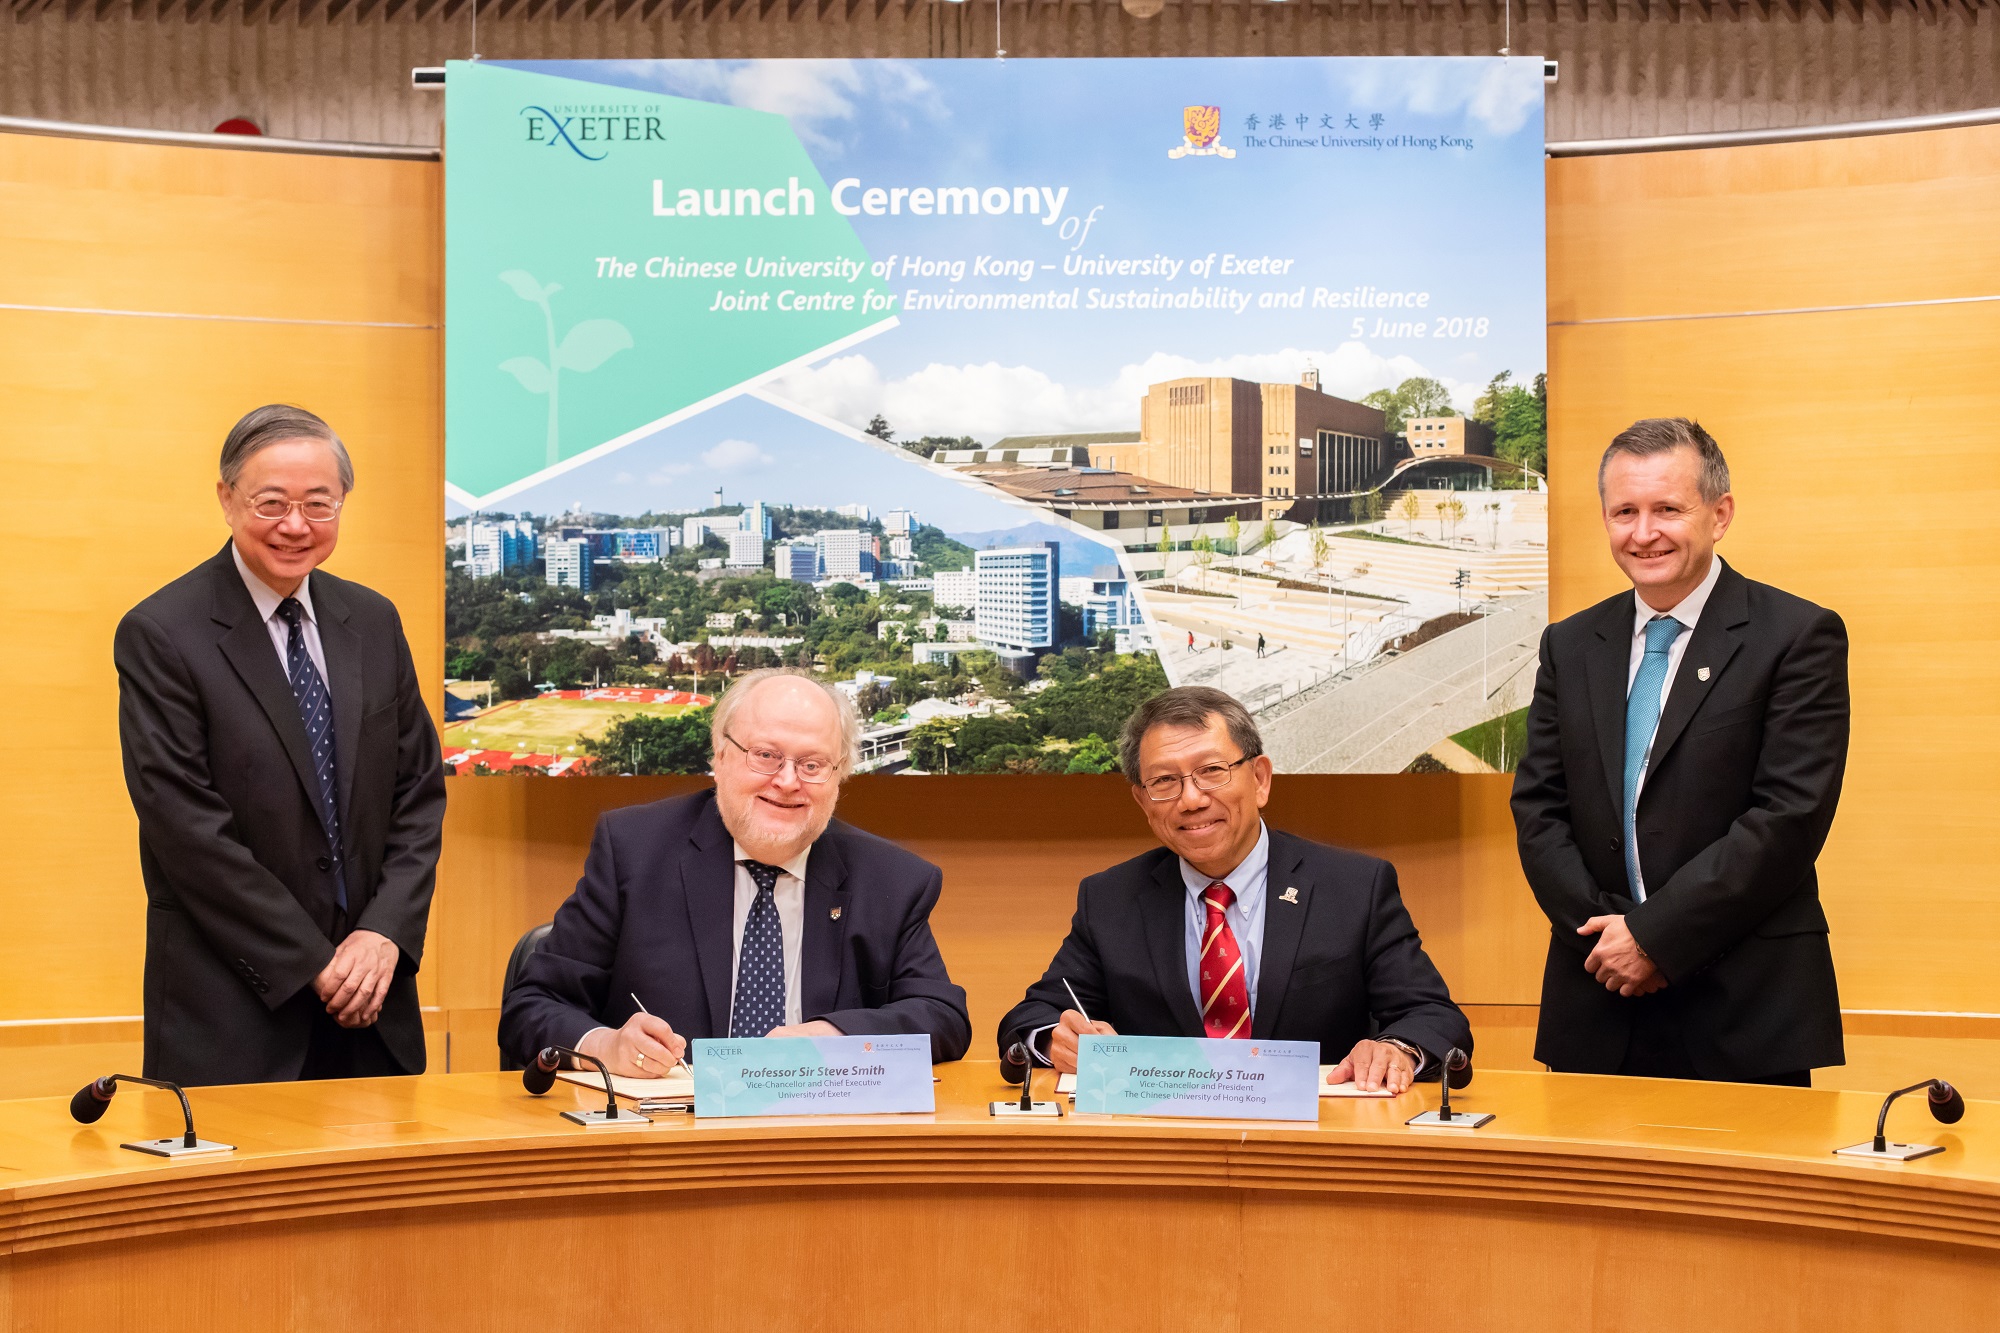 CUHK – University of Exeter Joint Centre for Environmental Sustainability and Resilience (ENSURE)